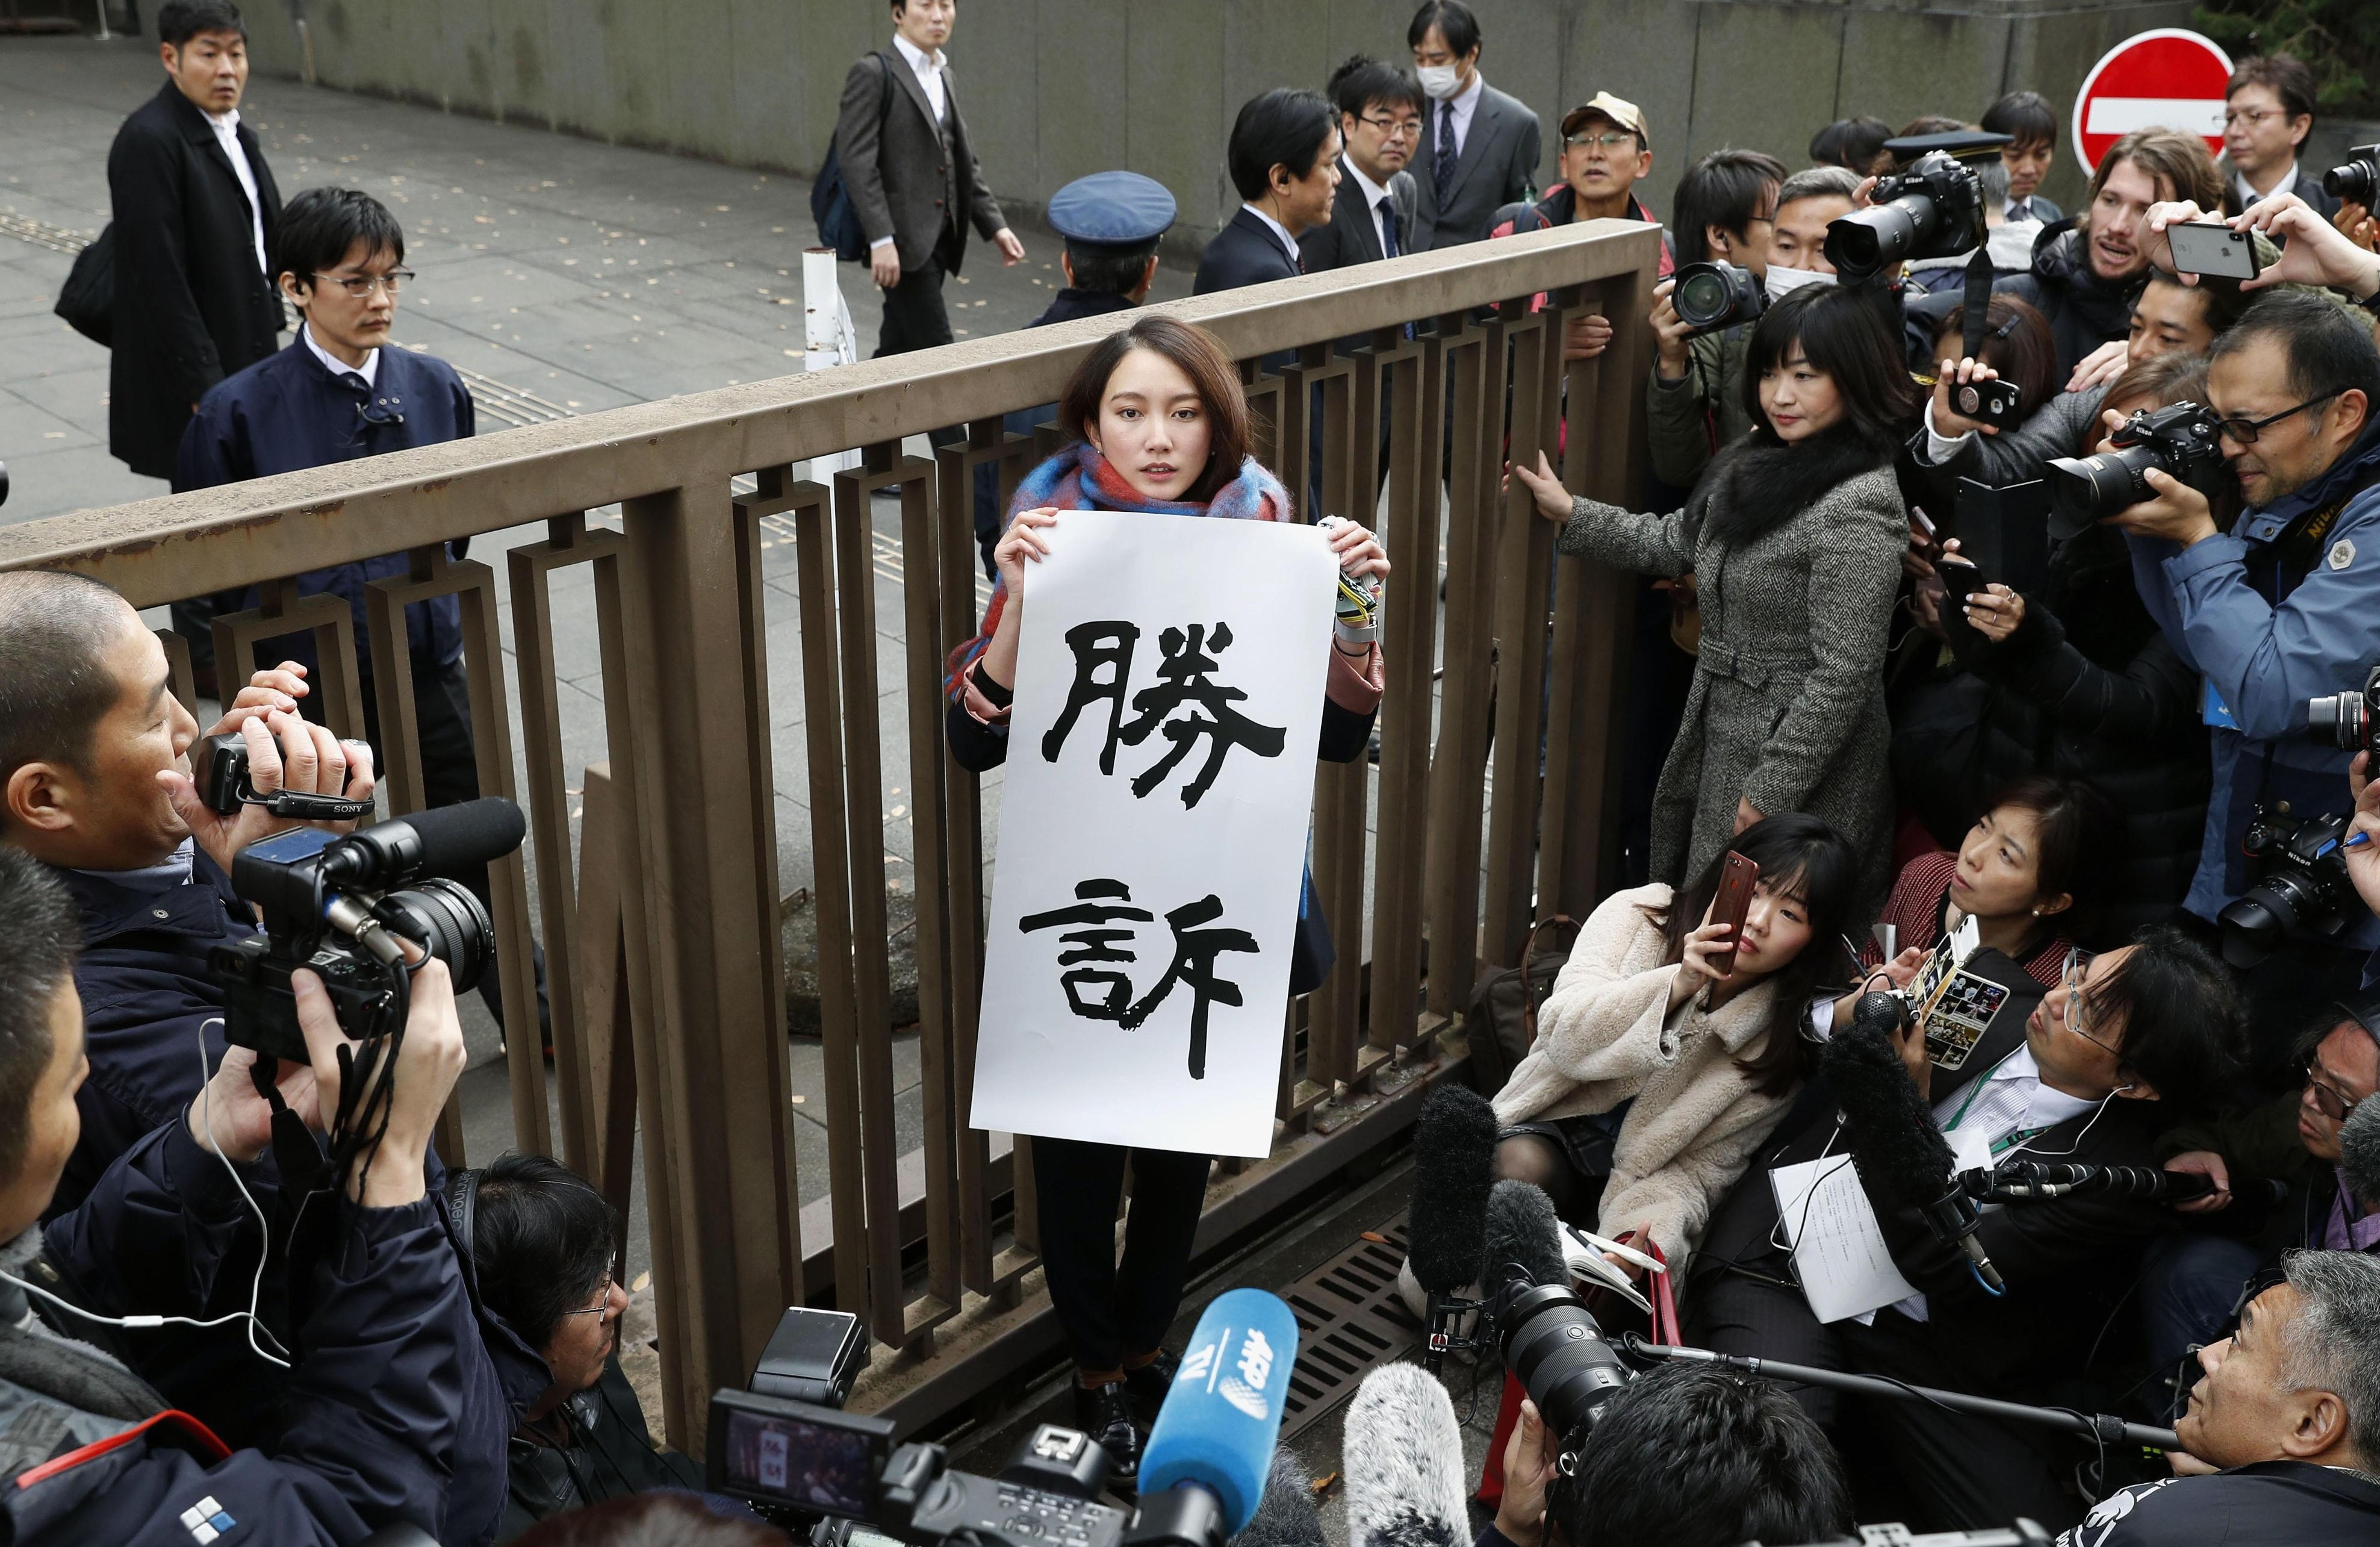 Japan journalist Shiori Ito awarded ¥3.3 million in damages in high-profile rape case hq nude image